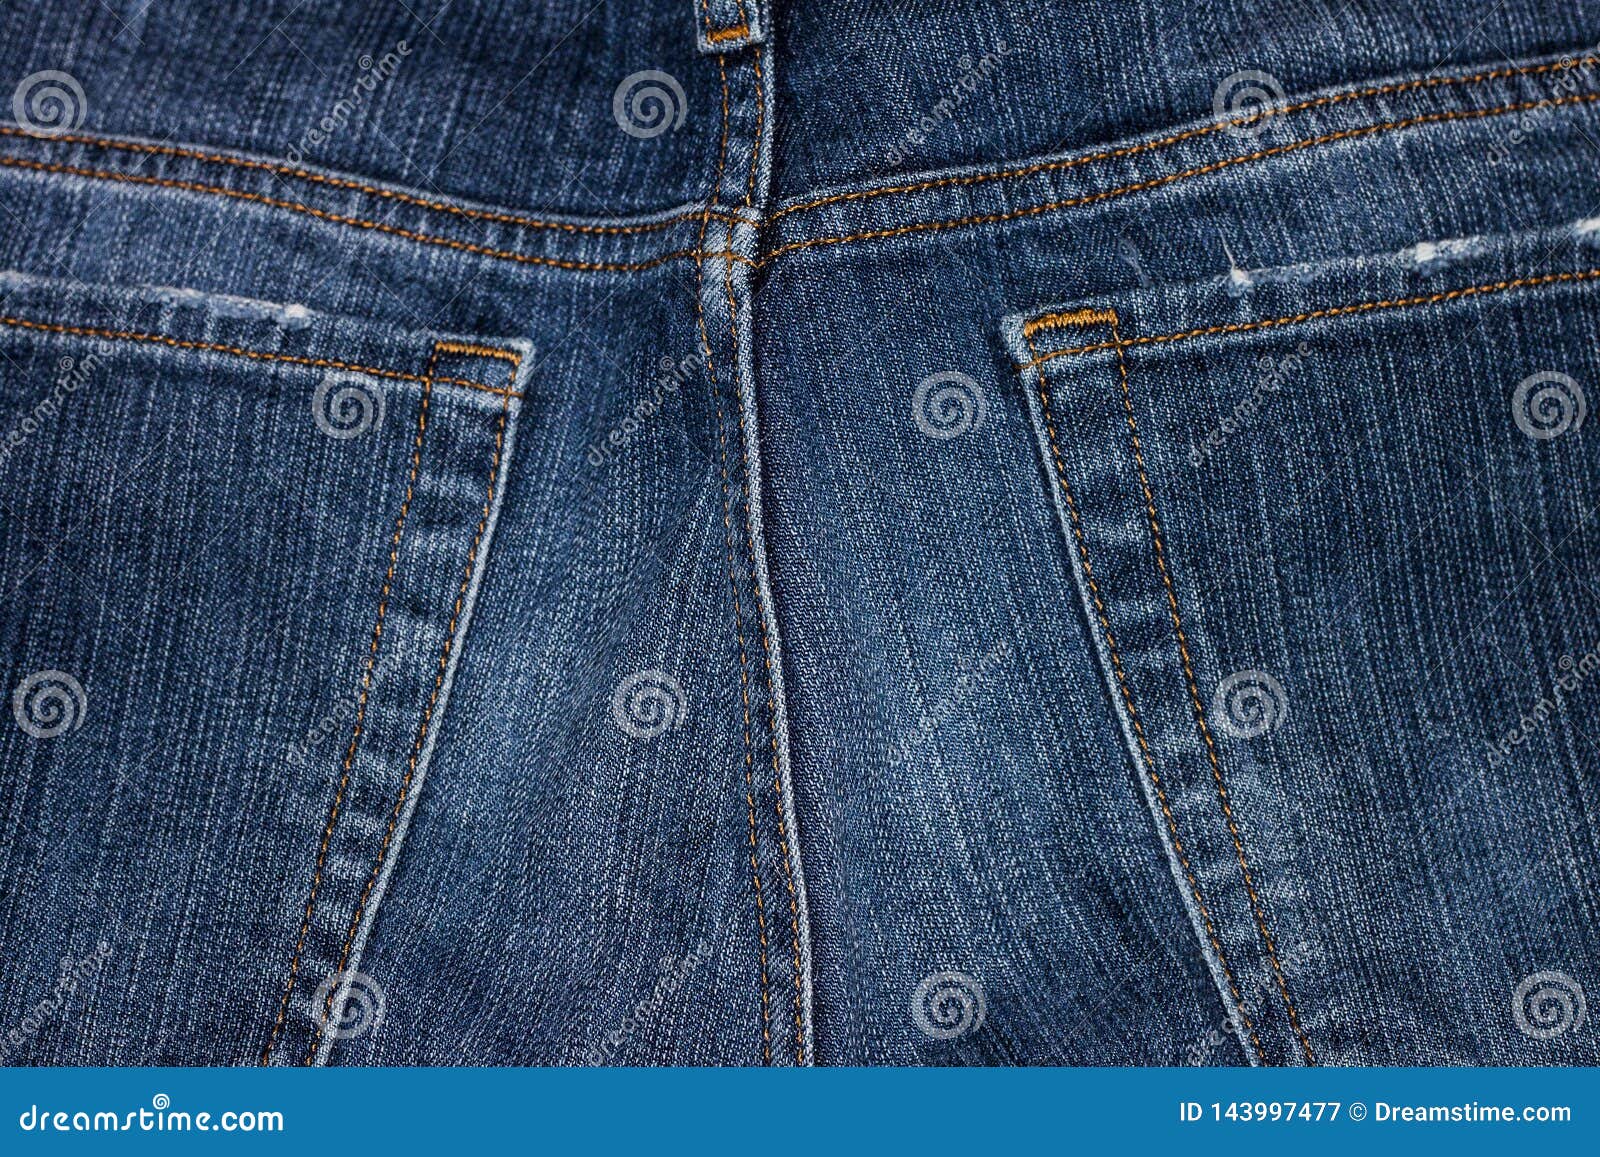 Blue Jeans Trousers and Texture Stock Image - Image of cotton, trousers ...